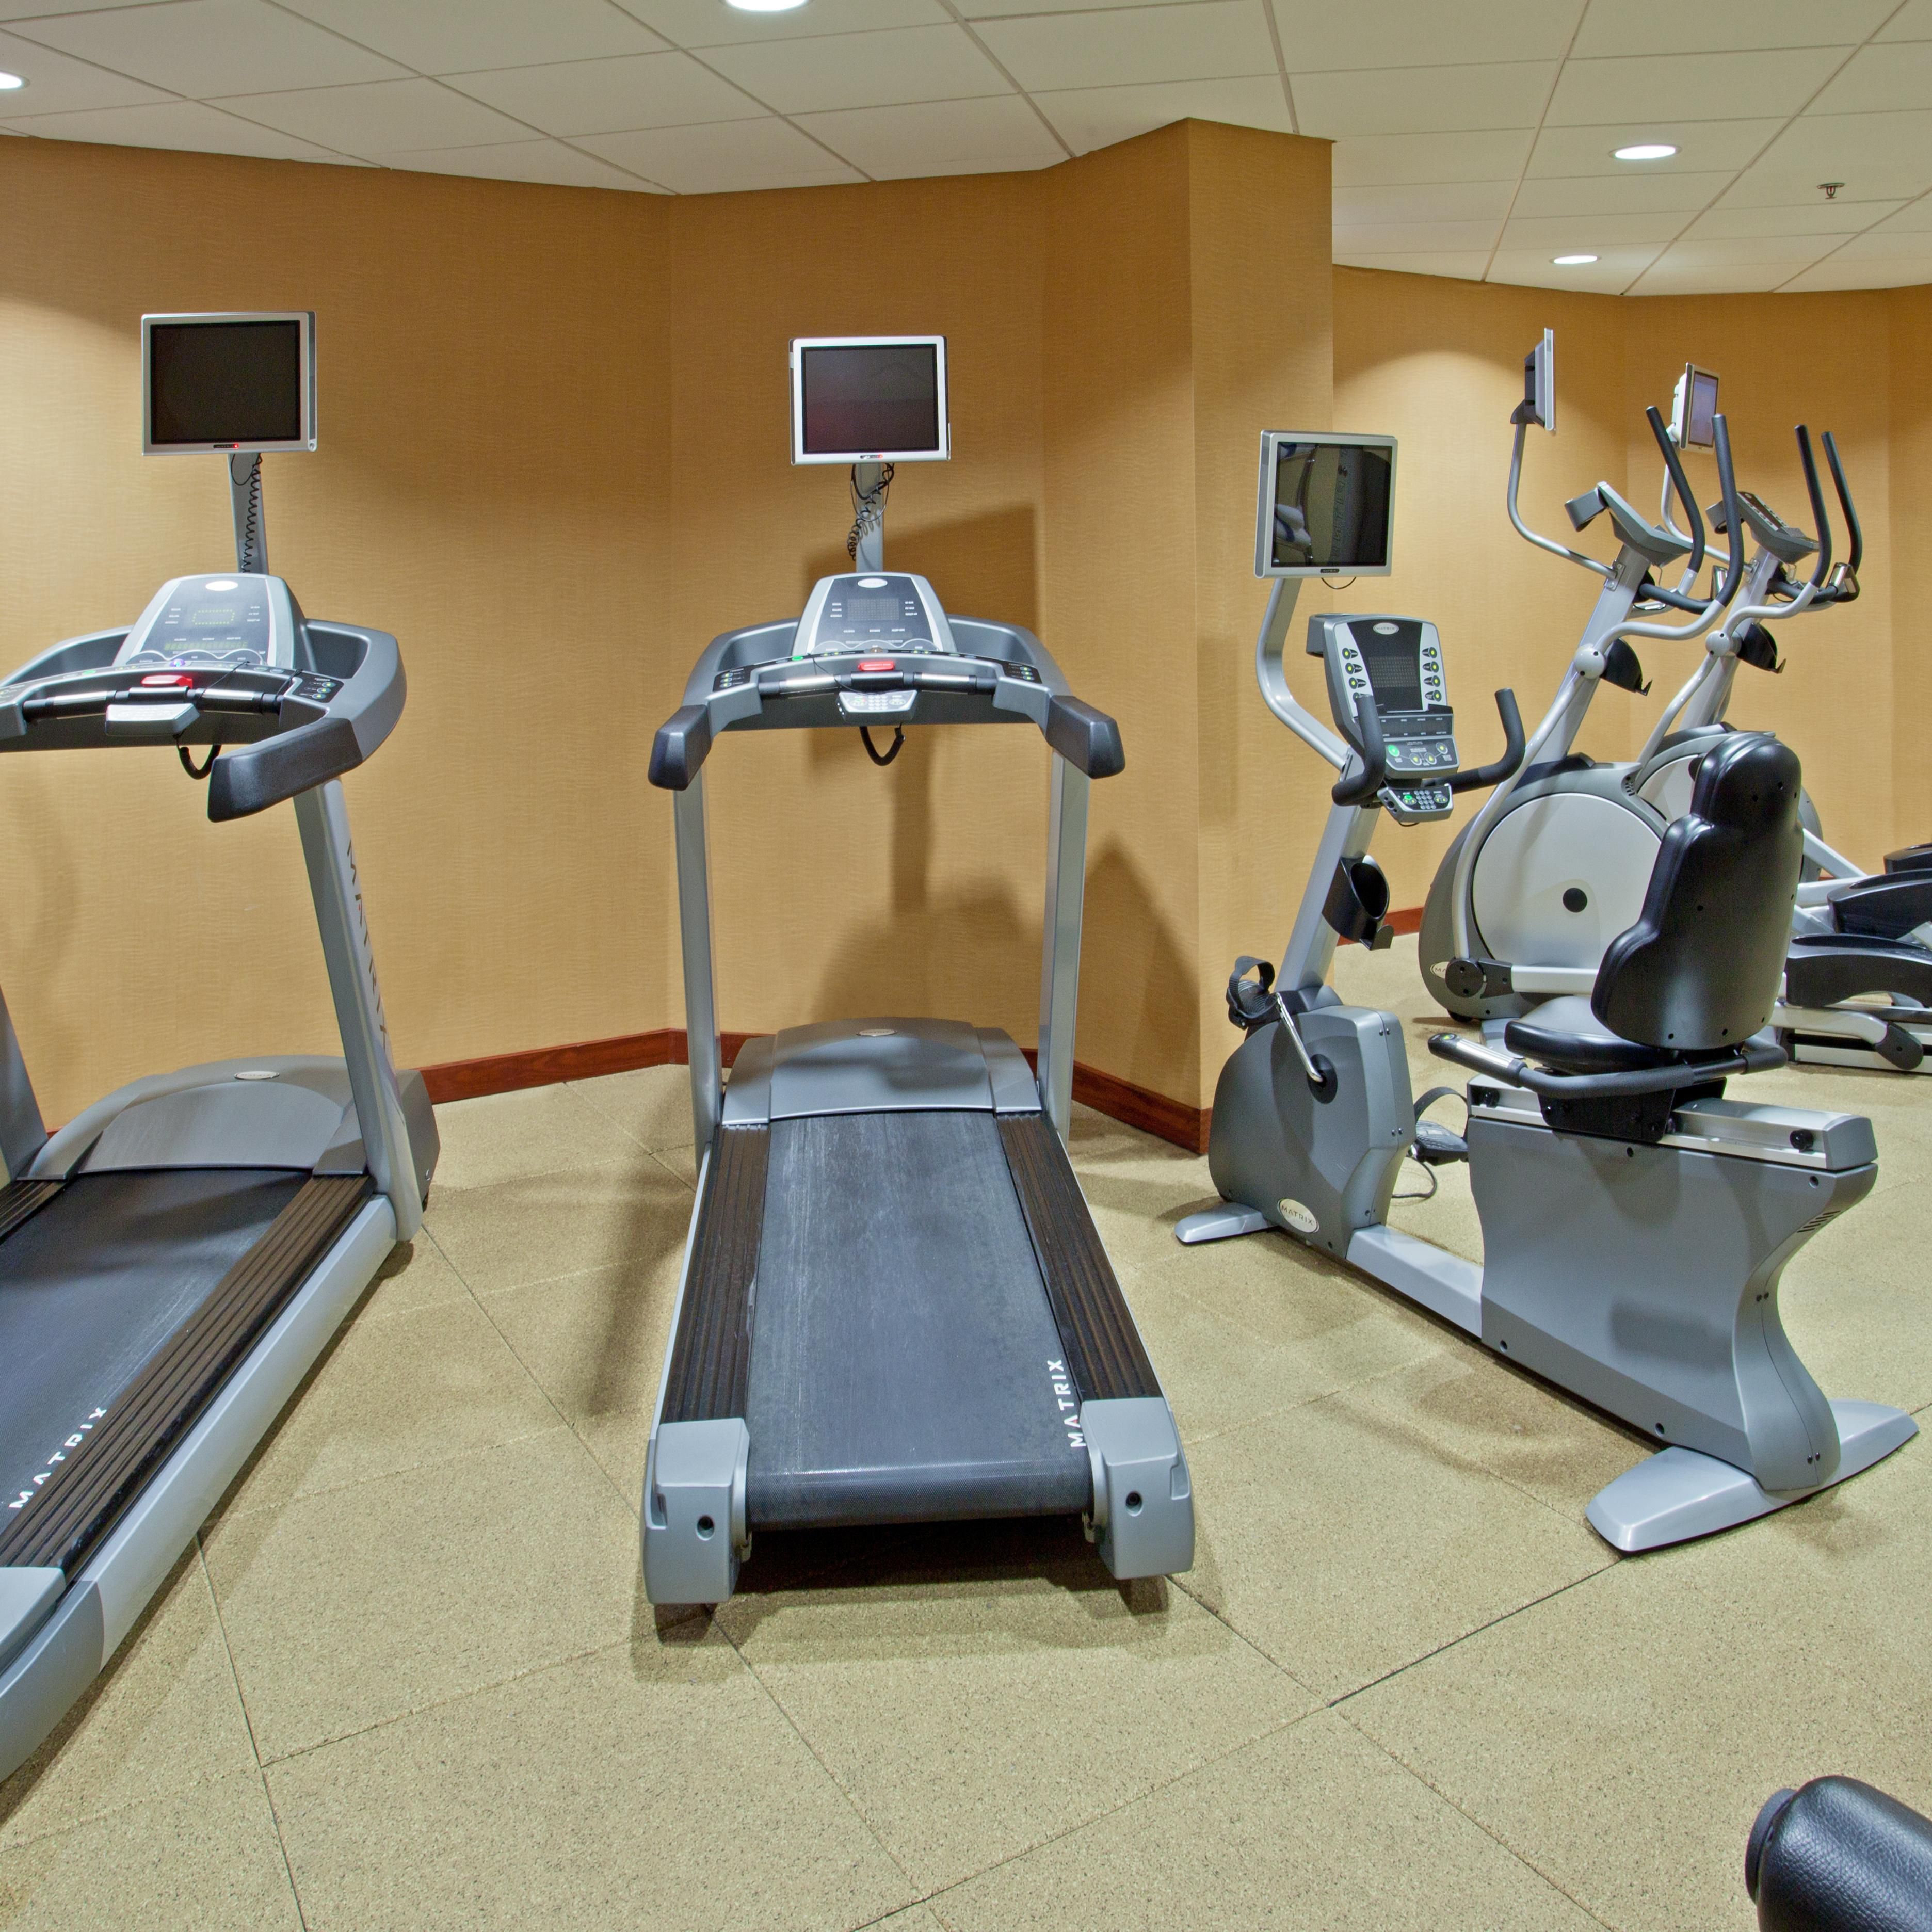 Stick to your wellness routine in our 24-hour fitness center.